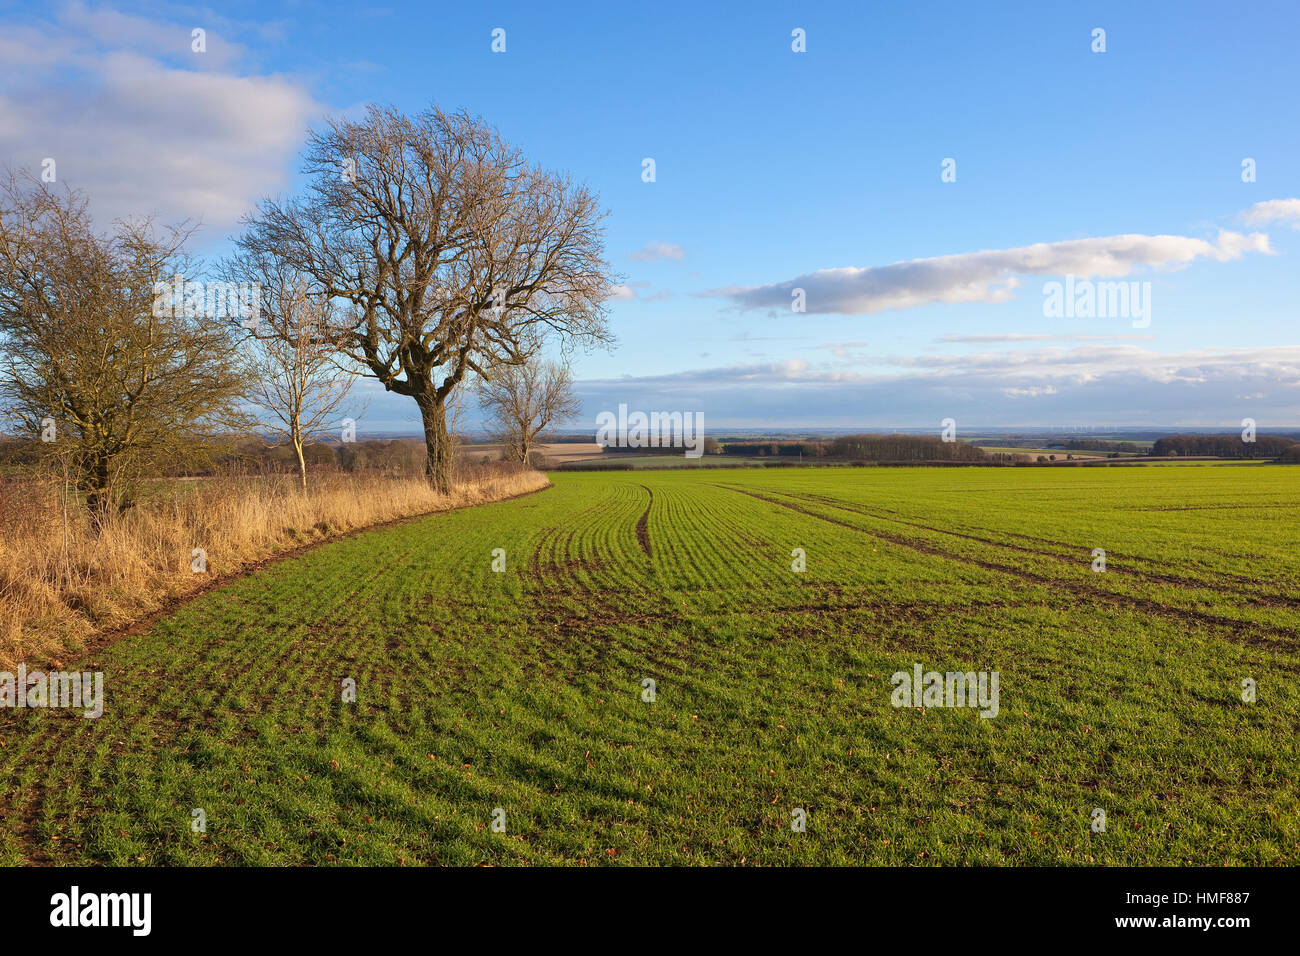 Curving lines and patterns in a young green cereal crop with trees and dry grasses under a blue cloudy sky in winter. Stock Photo